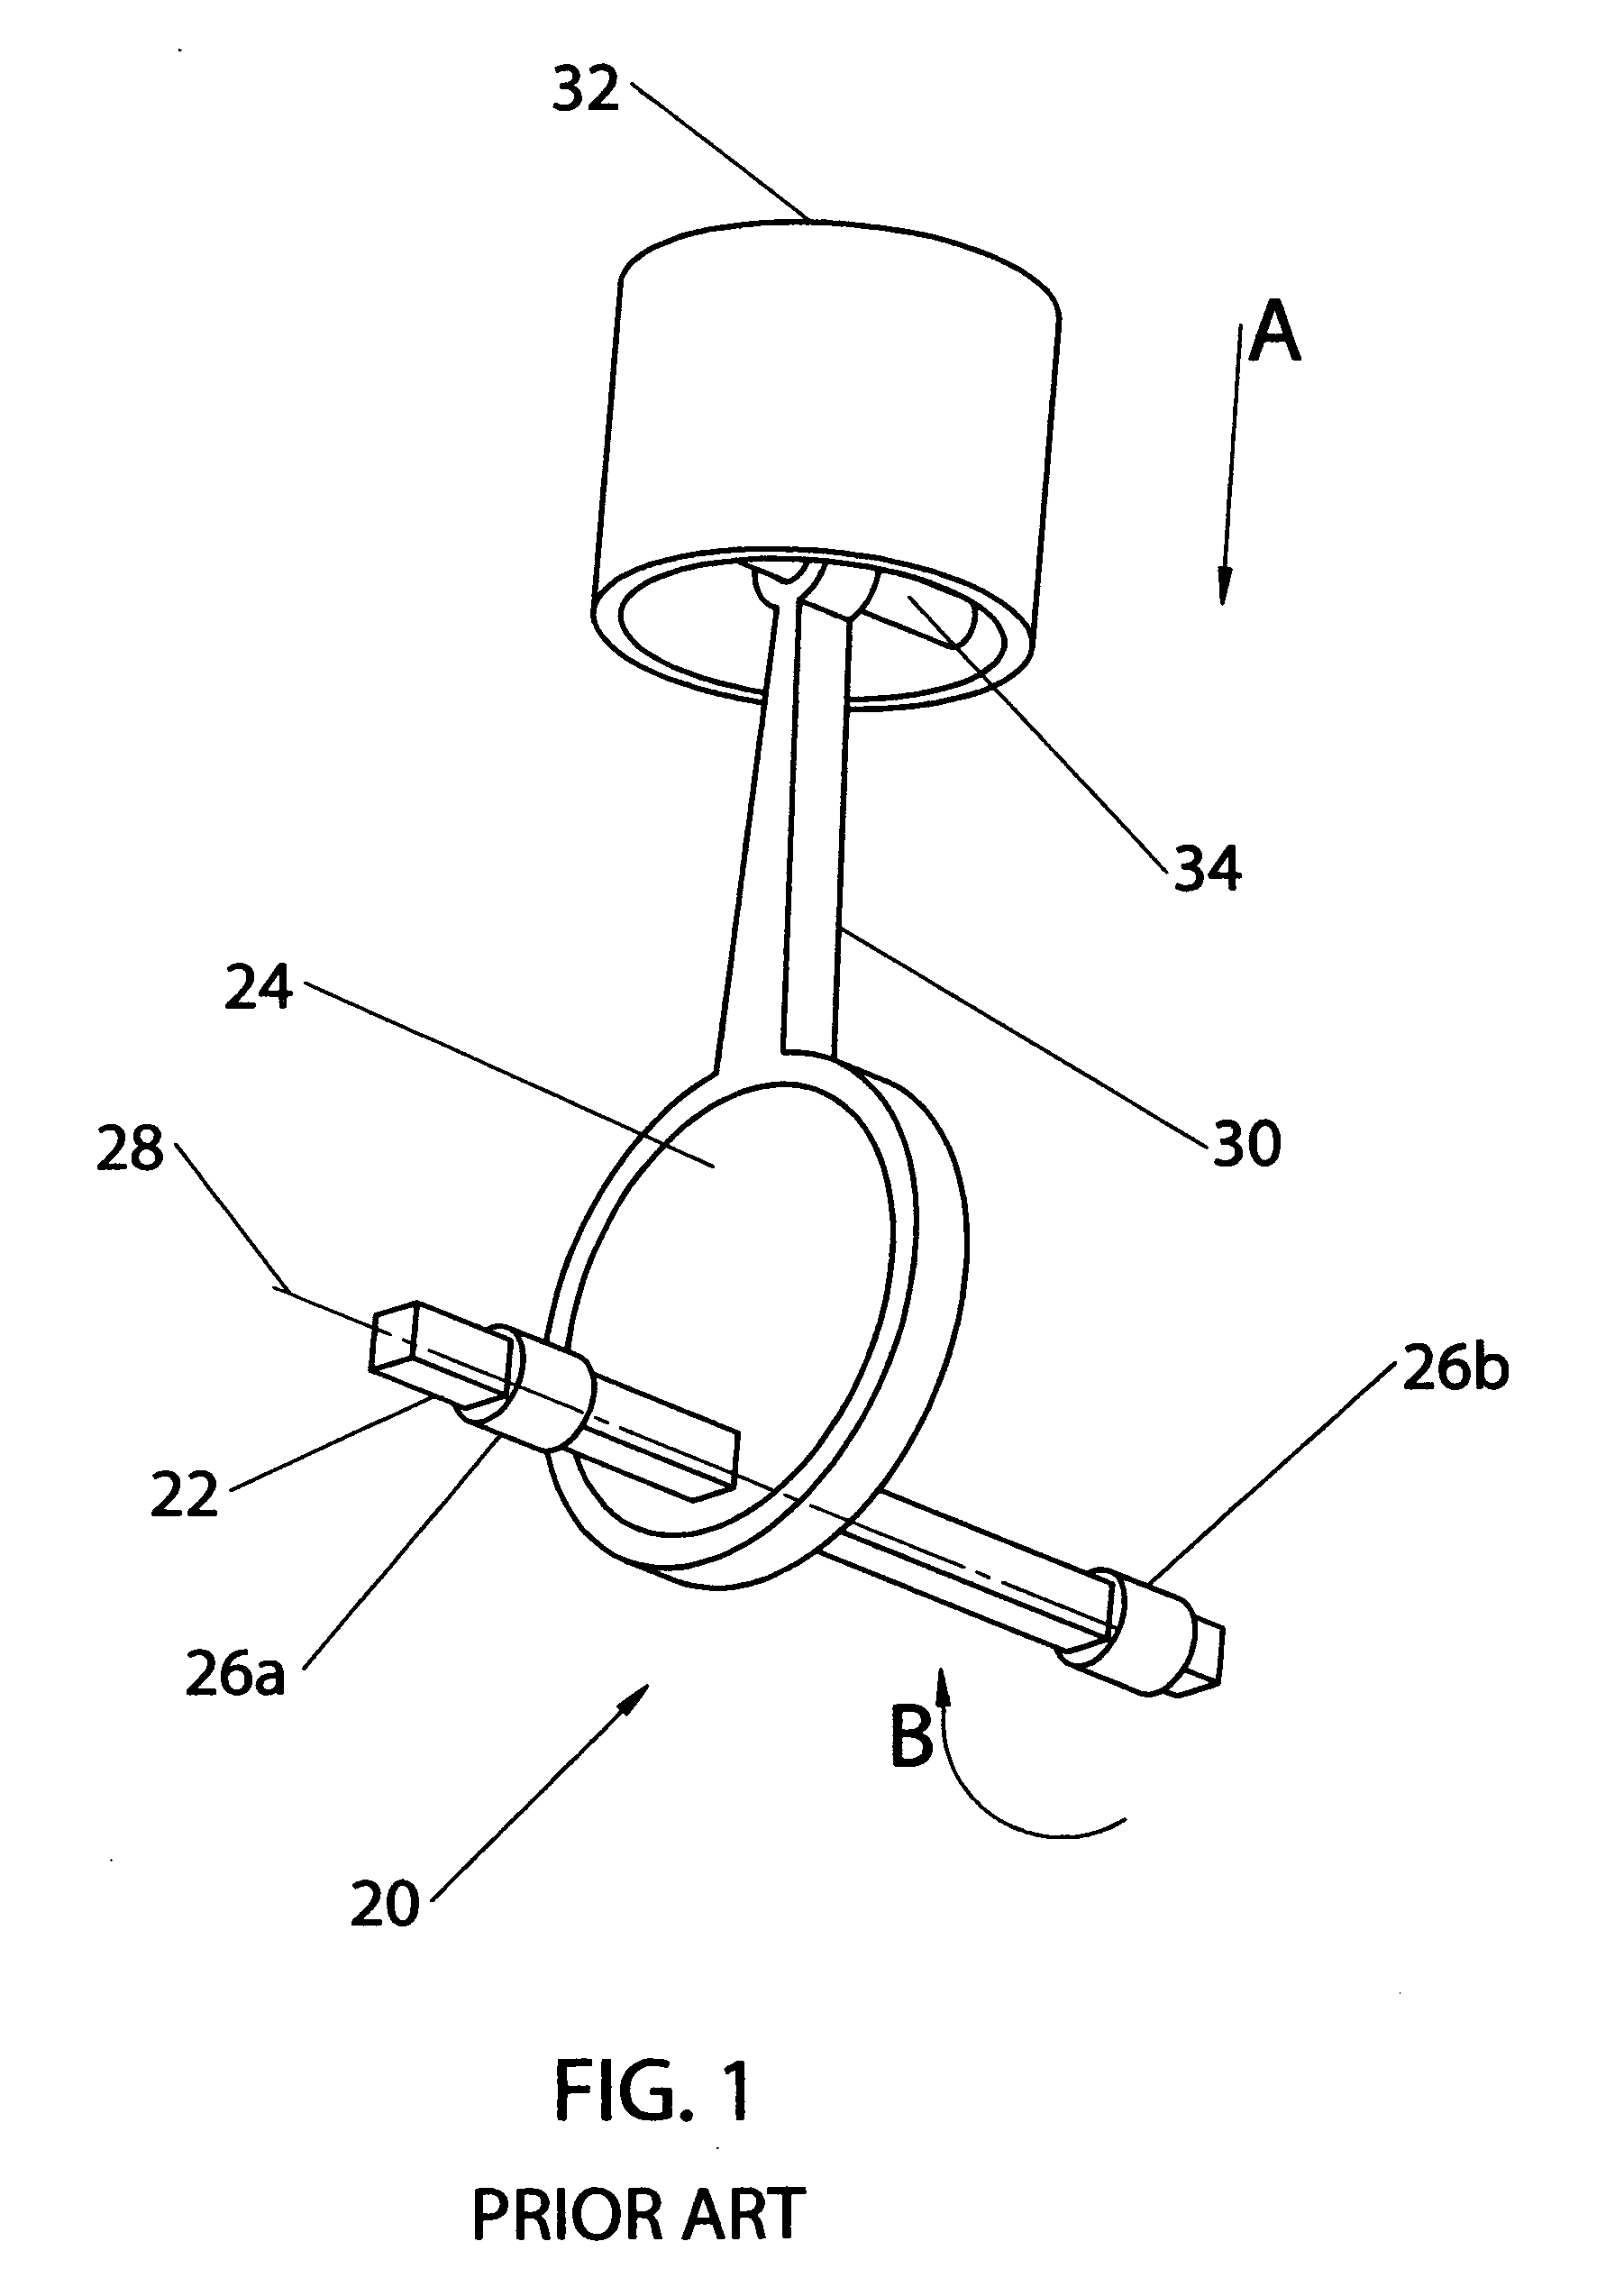 Reciprocating piston mechanism with extended piston offset